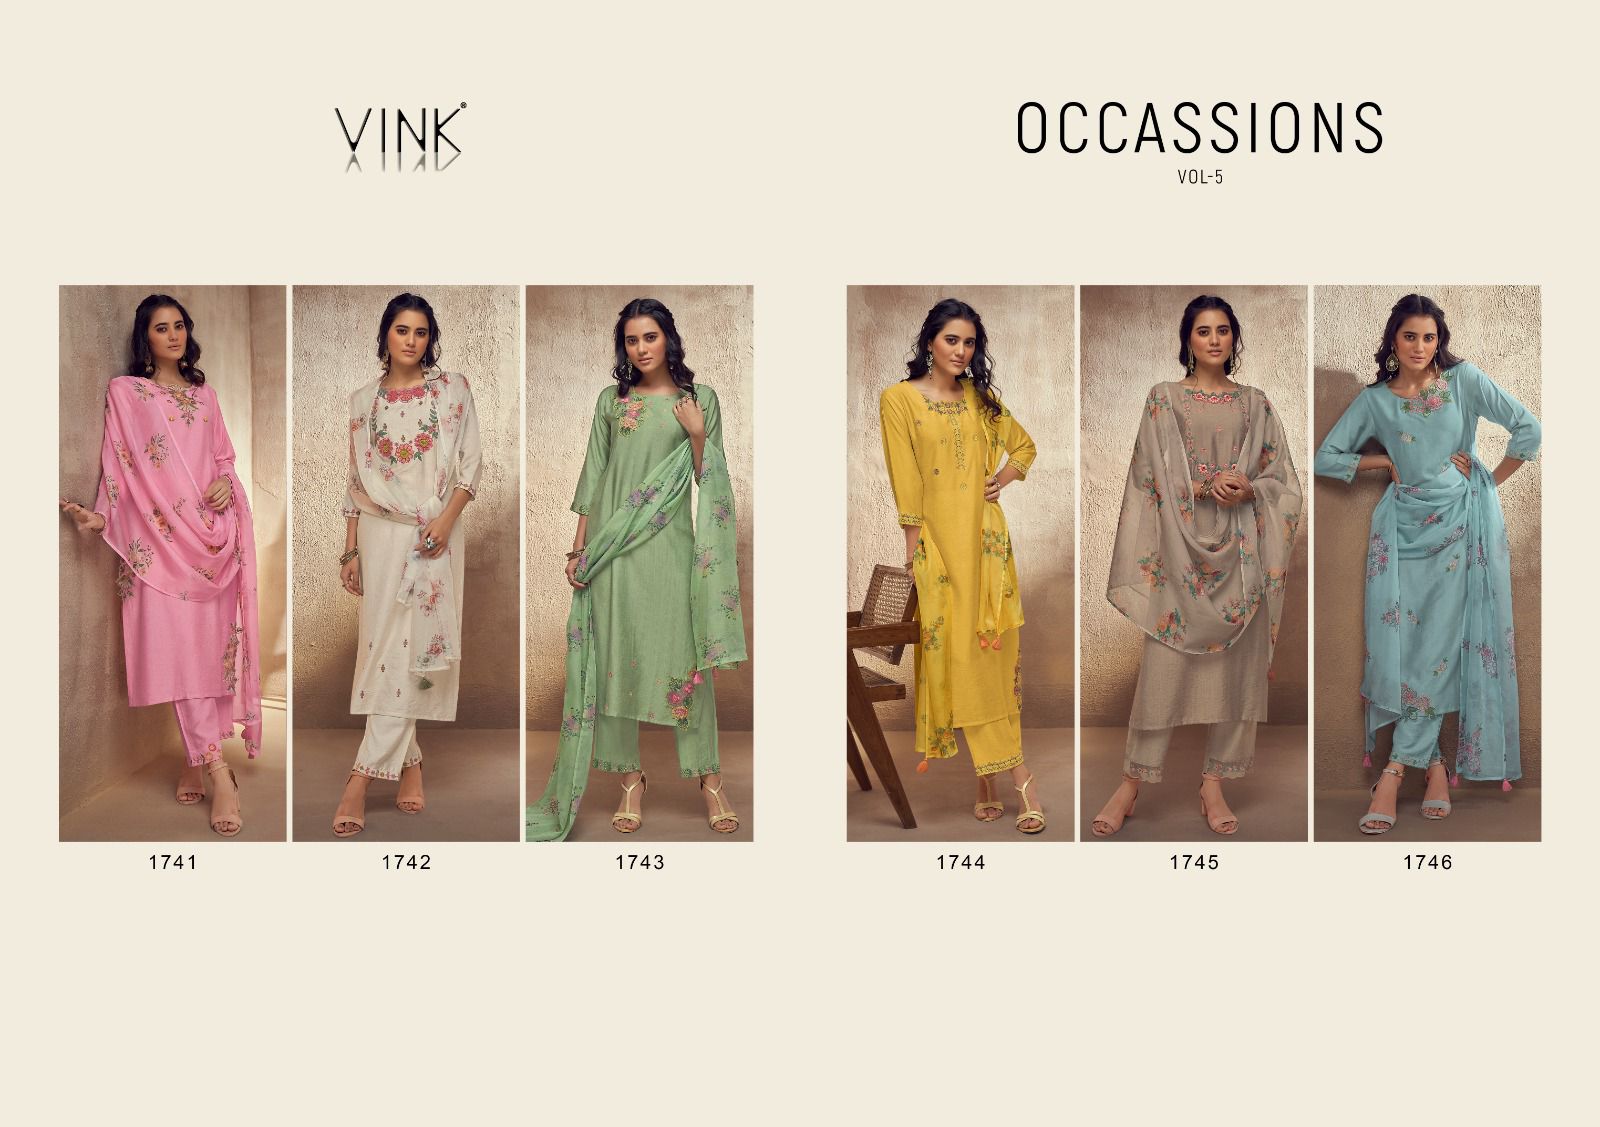 Vink Occassions Vol 5 collection 5